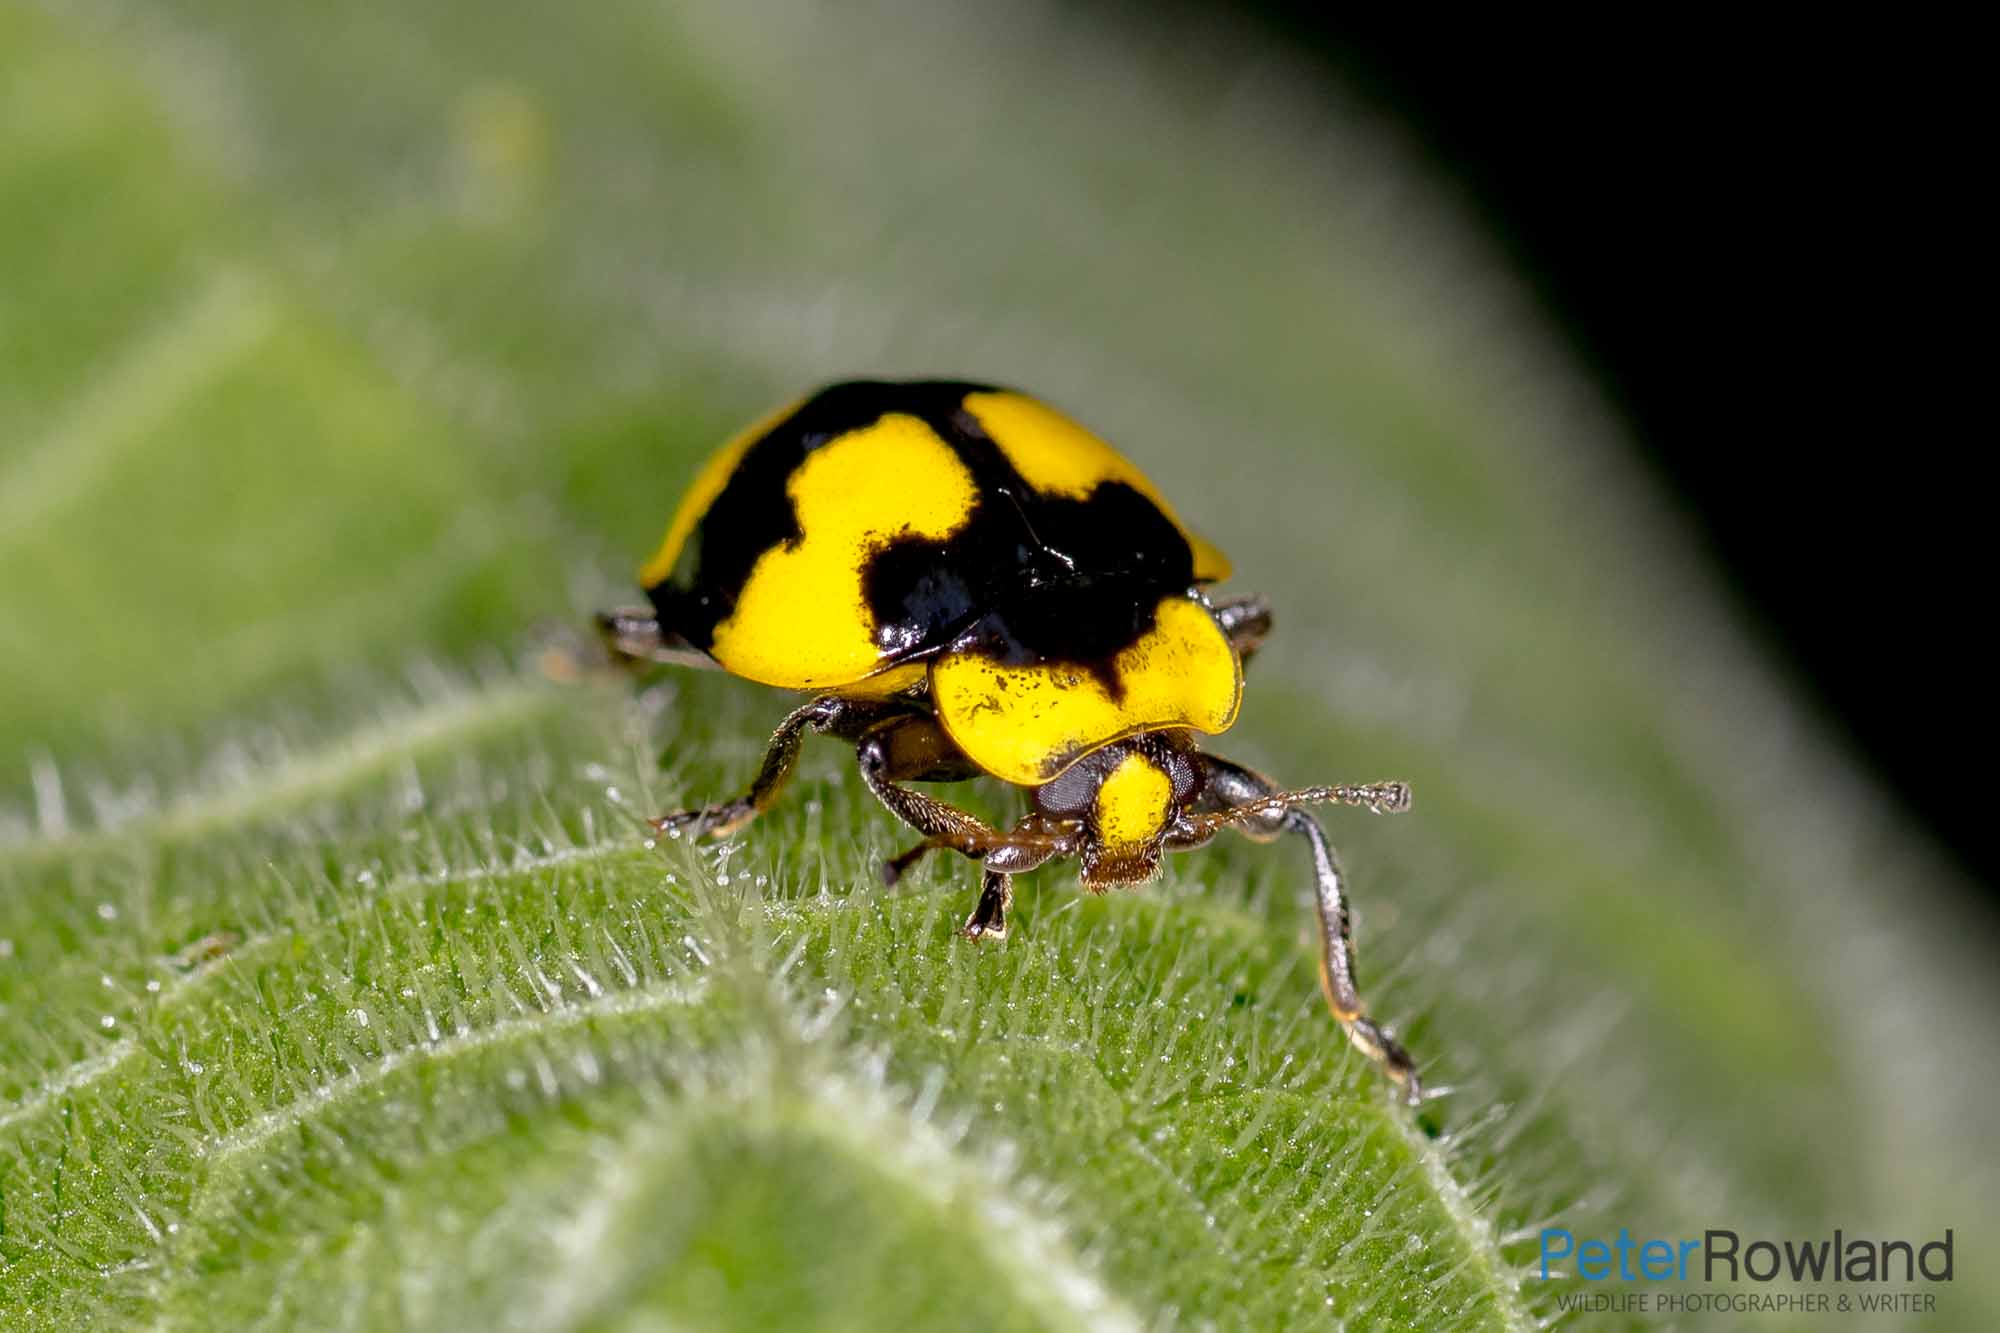 An adult Fungus-eating Ladybird on the leaf of a pumpkin plant